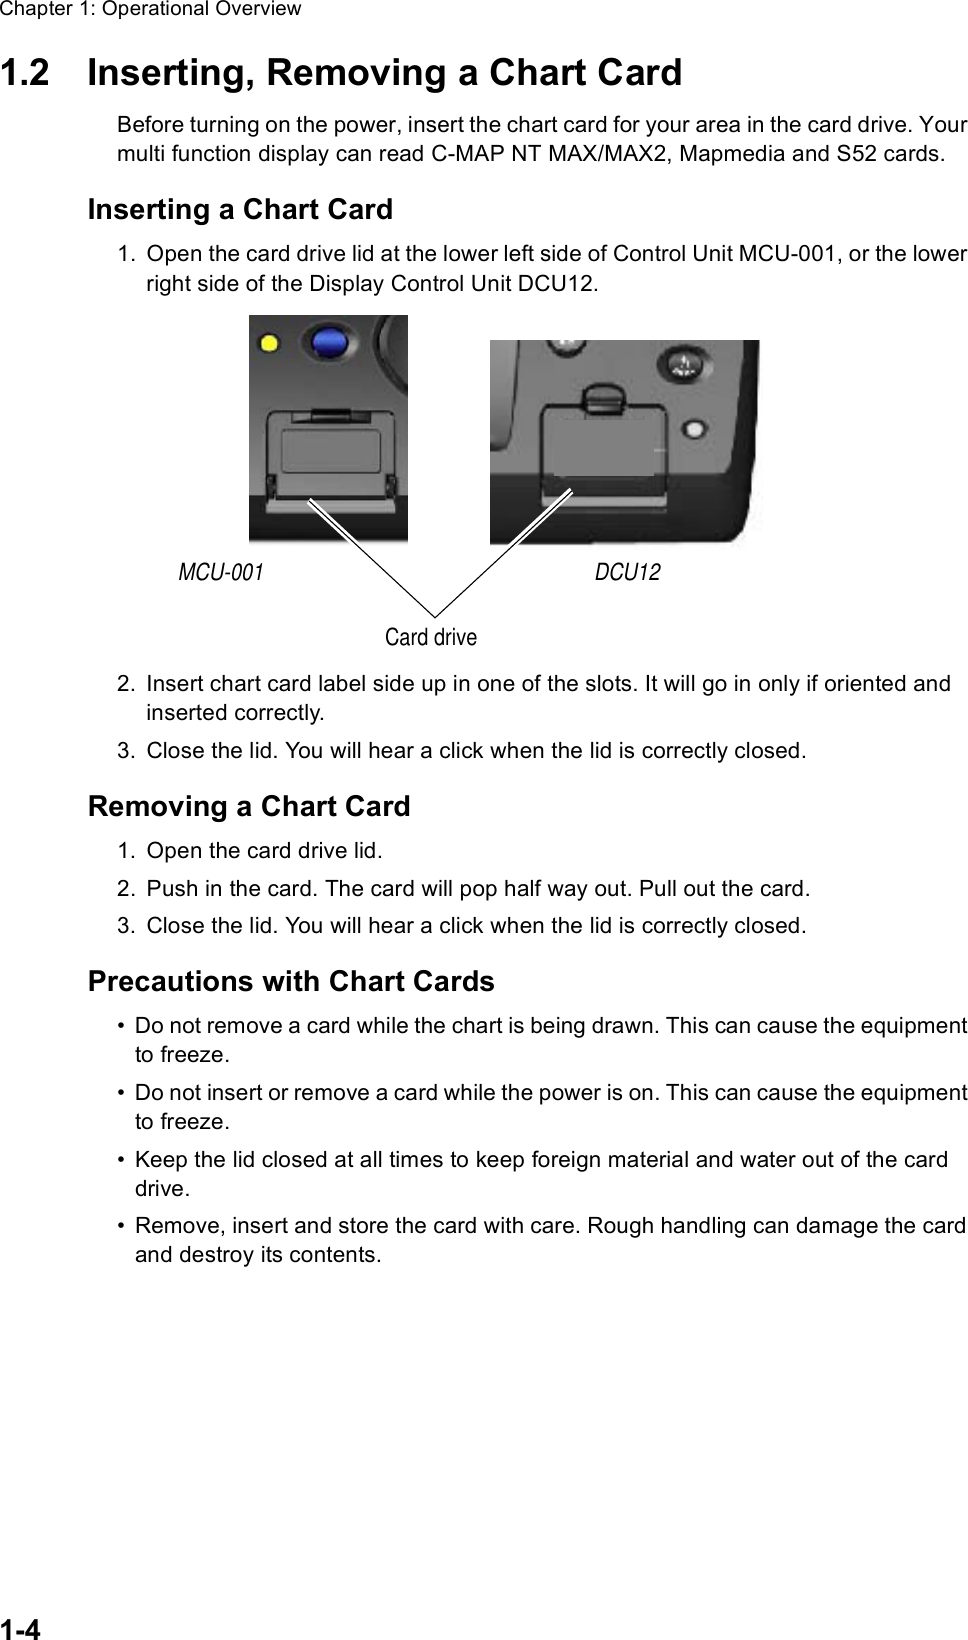 Chapter 1: Operational Overview1-41.2 Inserting, Removing a Chart CardBefore turning on the power, insert the chart card for your area in the card drive. Your multi function display can read C-MAP NT MAX/MAX2, Mapmedia and S52 cards.Inserting a Chart Card1. Open the card drive lid at the lower left side of Control Unit MCU-001, or the lower right side of the Display Control Unit DCU12.2. Insert chart card label side up in one of the slots. It will go in only if oriented and inserted correctly.3. Close the lid. You will hear a click when the lid is correctly closed.Removing a Chart Card1. Open the card drive lid.2. Push in the card. The card will pop half way out. Pull out the card.3. Close the lid. You will hear a click when the lid is correctly closed. Precautions with Chart Cards• Do not remove a card while the chart is being drawn. This can cause the equipment to freeze.• Do not insert or remove a card while the power is on. This can cause the equipment to freeze.• Keep the lid closed at all times to keep foreign material and water out of the card drive.• Remove, insert and store the card with care. Rough handling can damage the card and destroy its contents. DCU12MCU-001Card drive